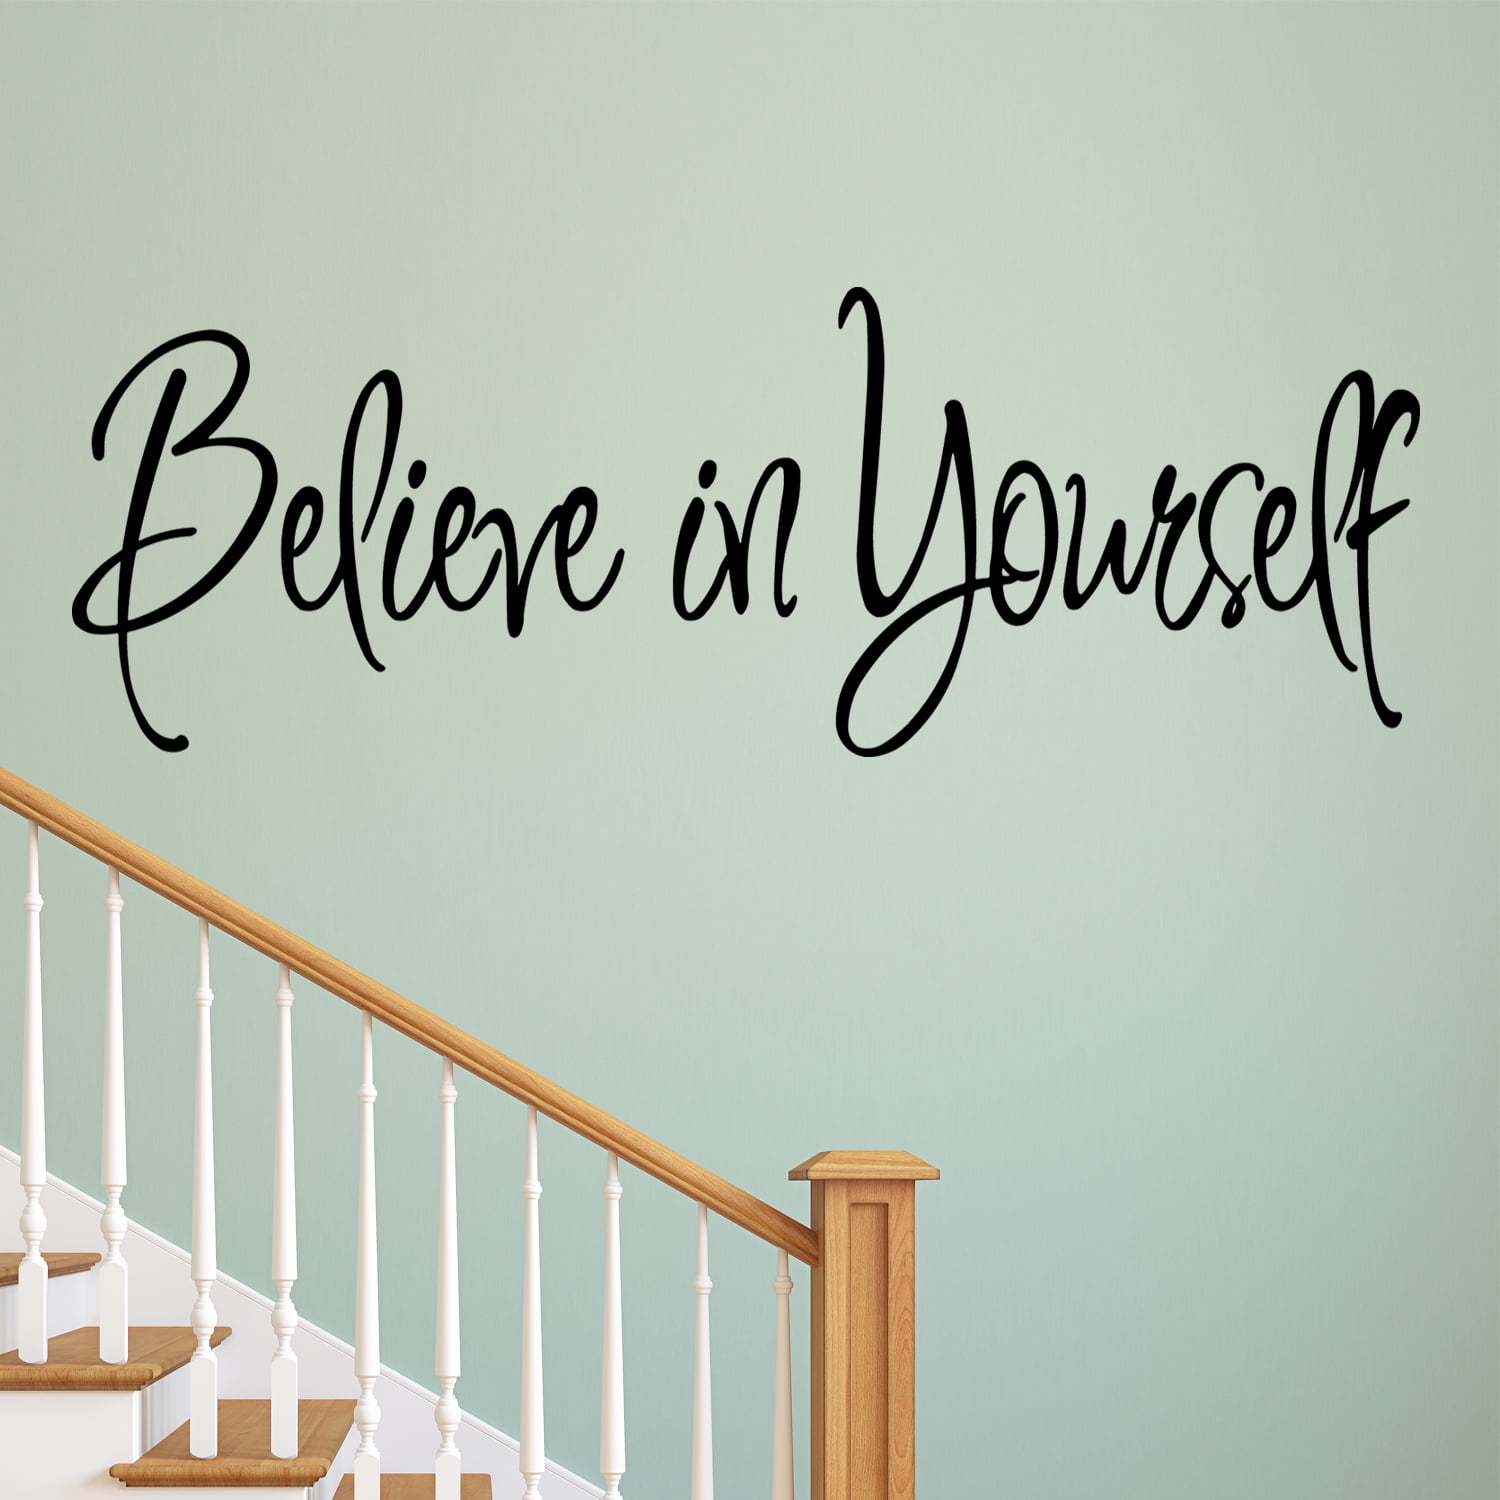 Believe in yourself decal Home Decor Motivation Positivity Leadership Be You Sticker Believe in Yourself sticker Be You Decal